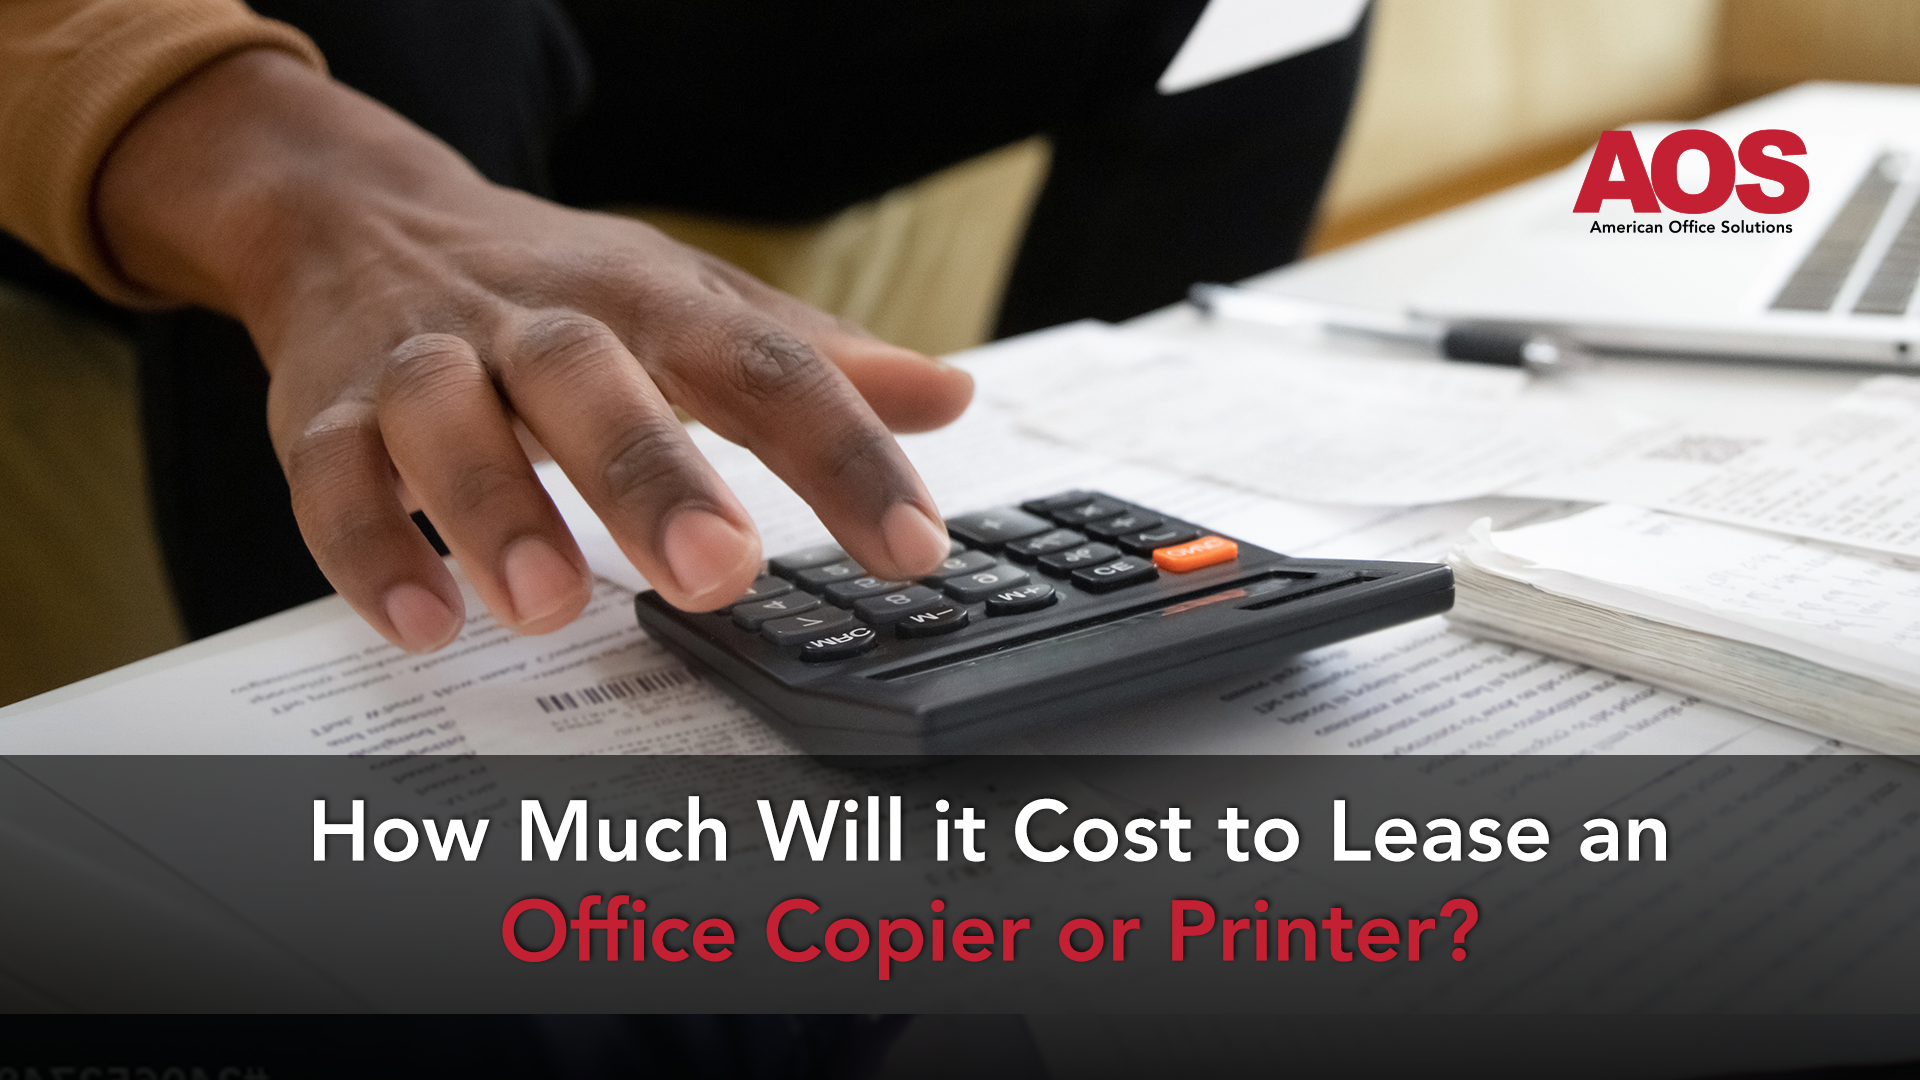 How Much Will It Cost To Lease An Office Copier or Printer?